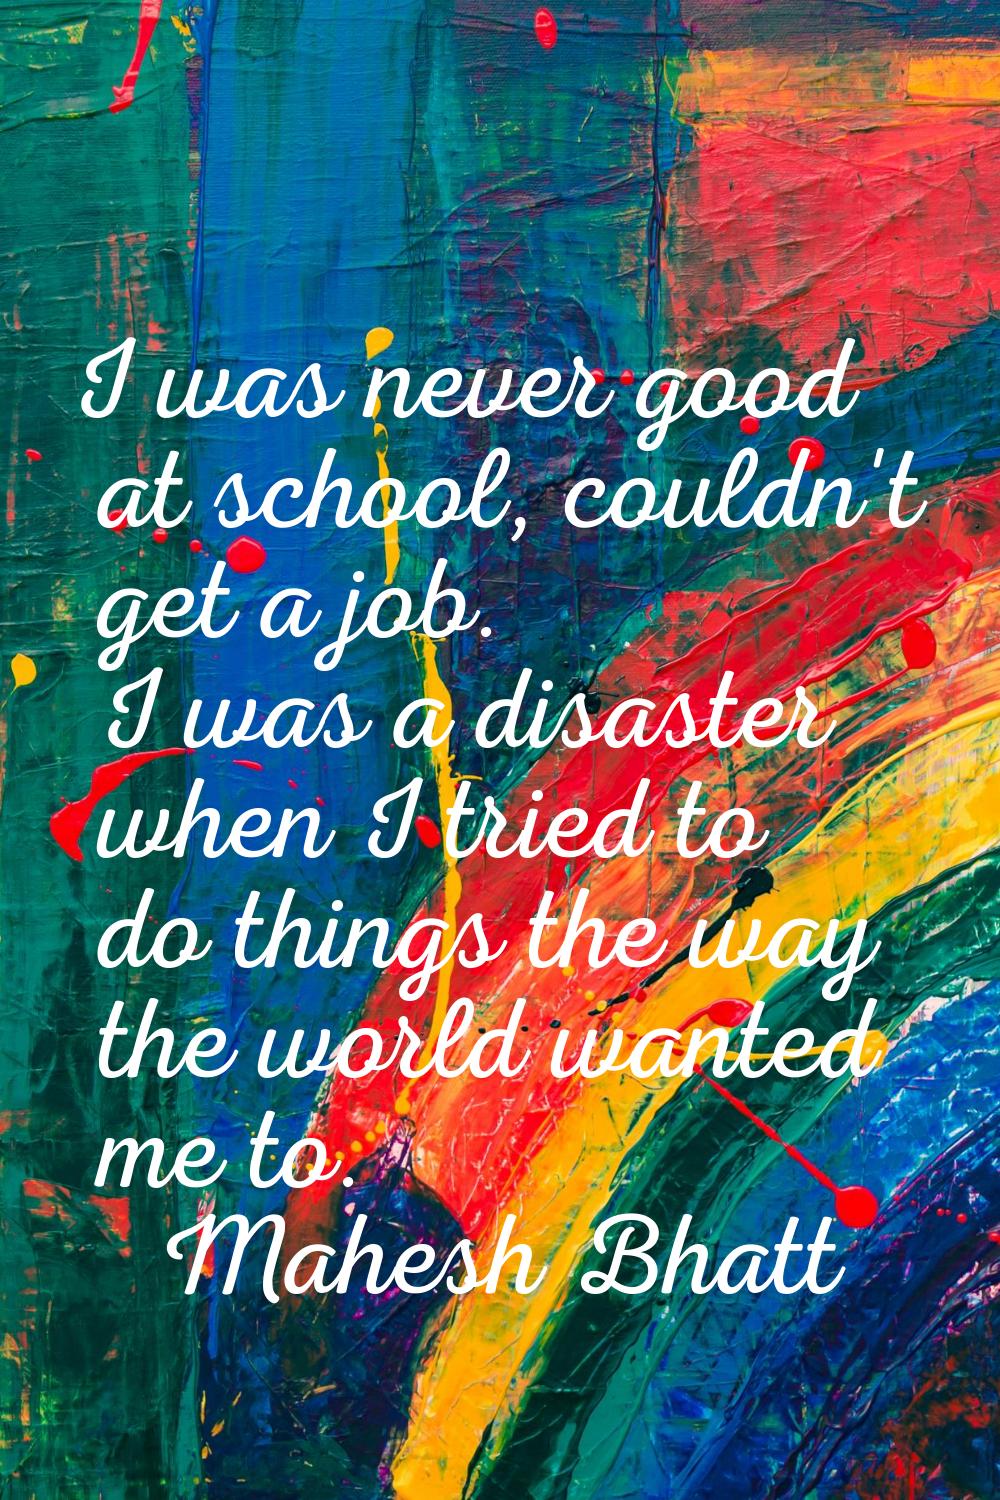 I was never good at school, couldn't get a job. I was a disaster when I tried to do things the way 